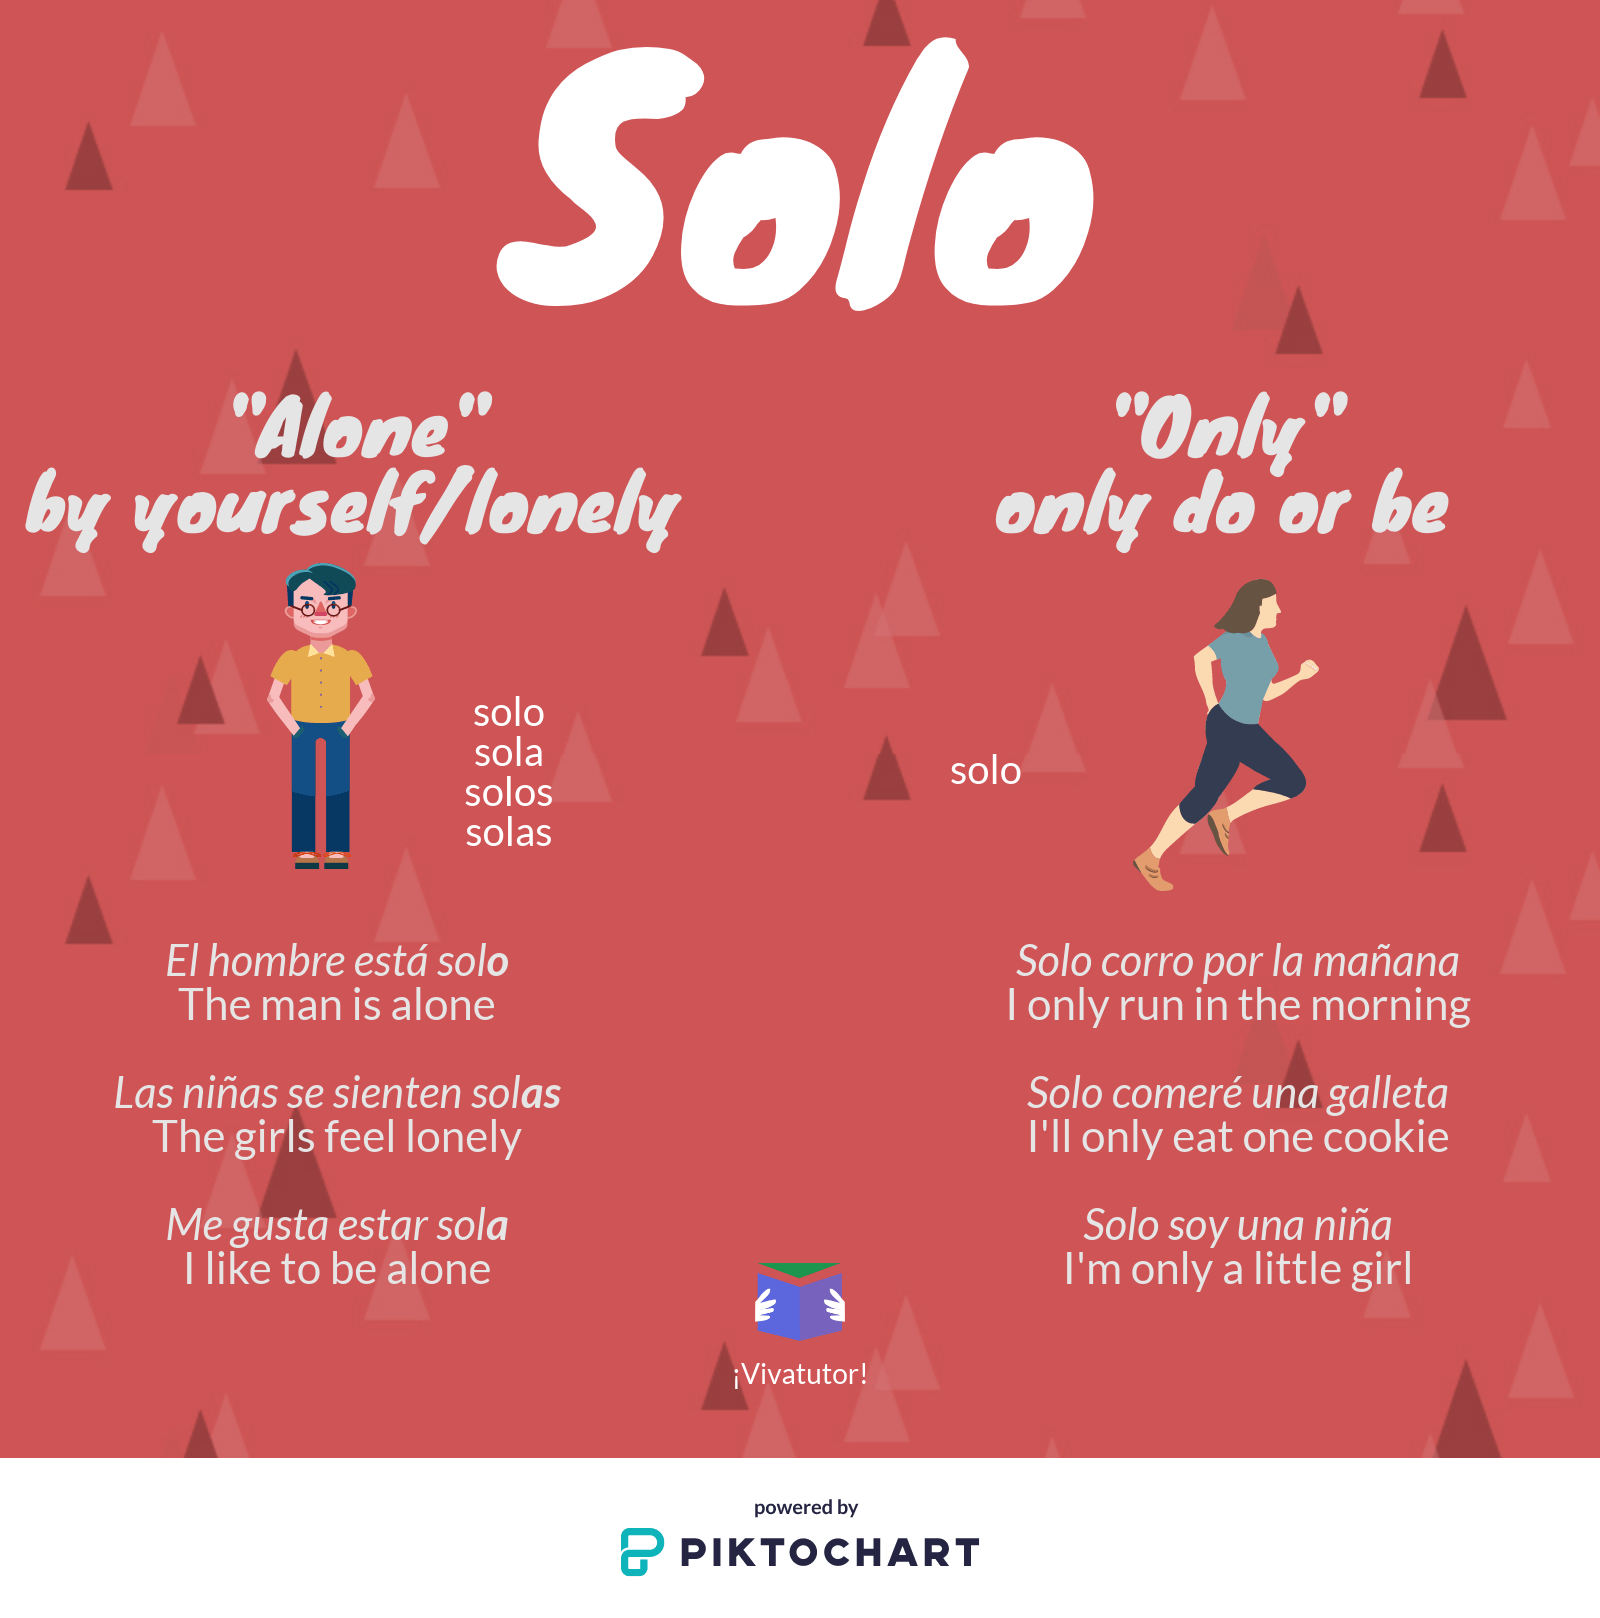 SOLO - only, alone, the only one?